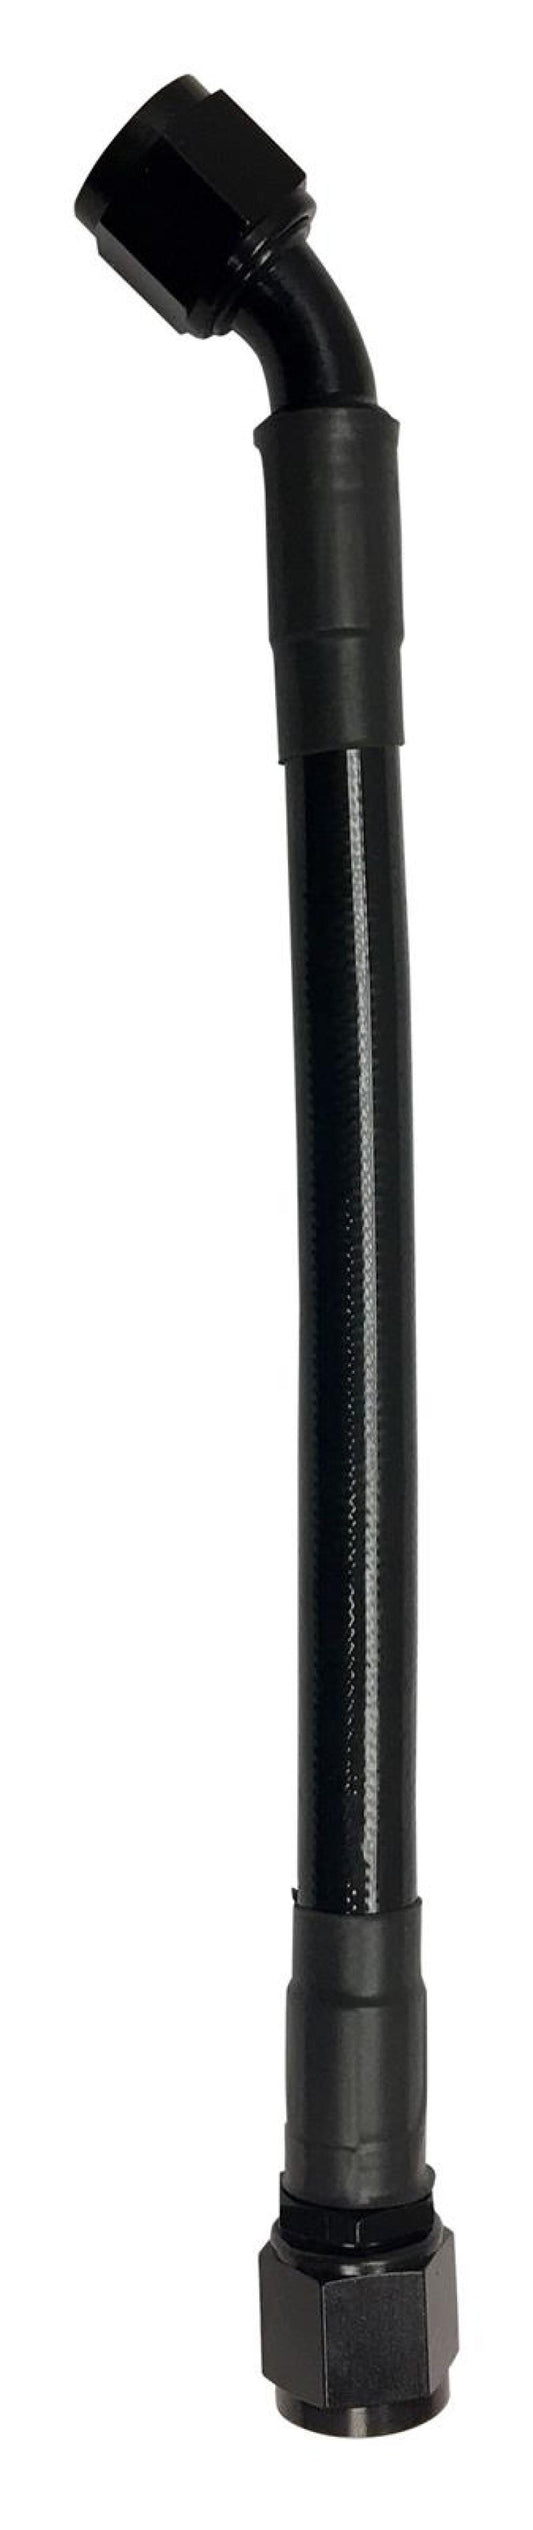 Fragola -10AN Ext Black PTFE Hose Assembly Straight x 45 Degree 42in